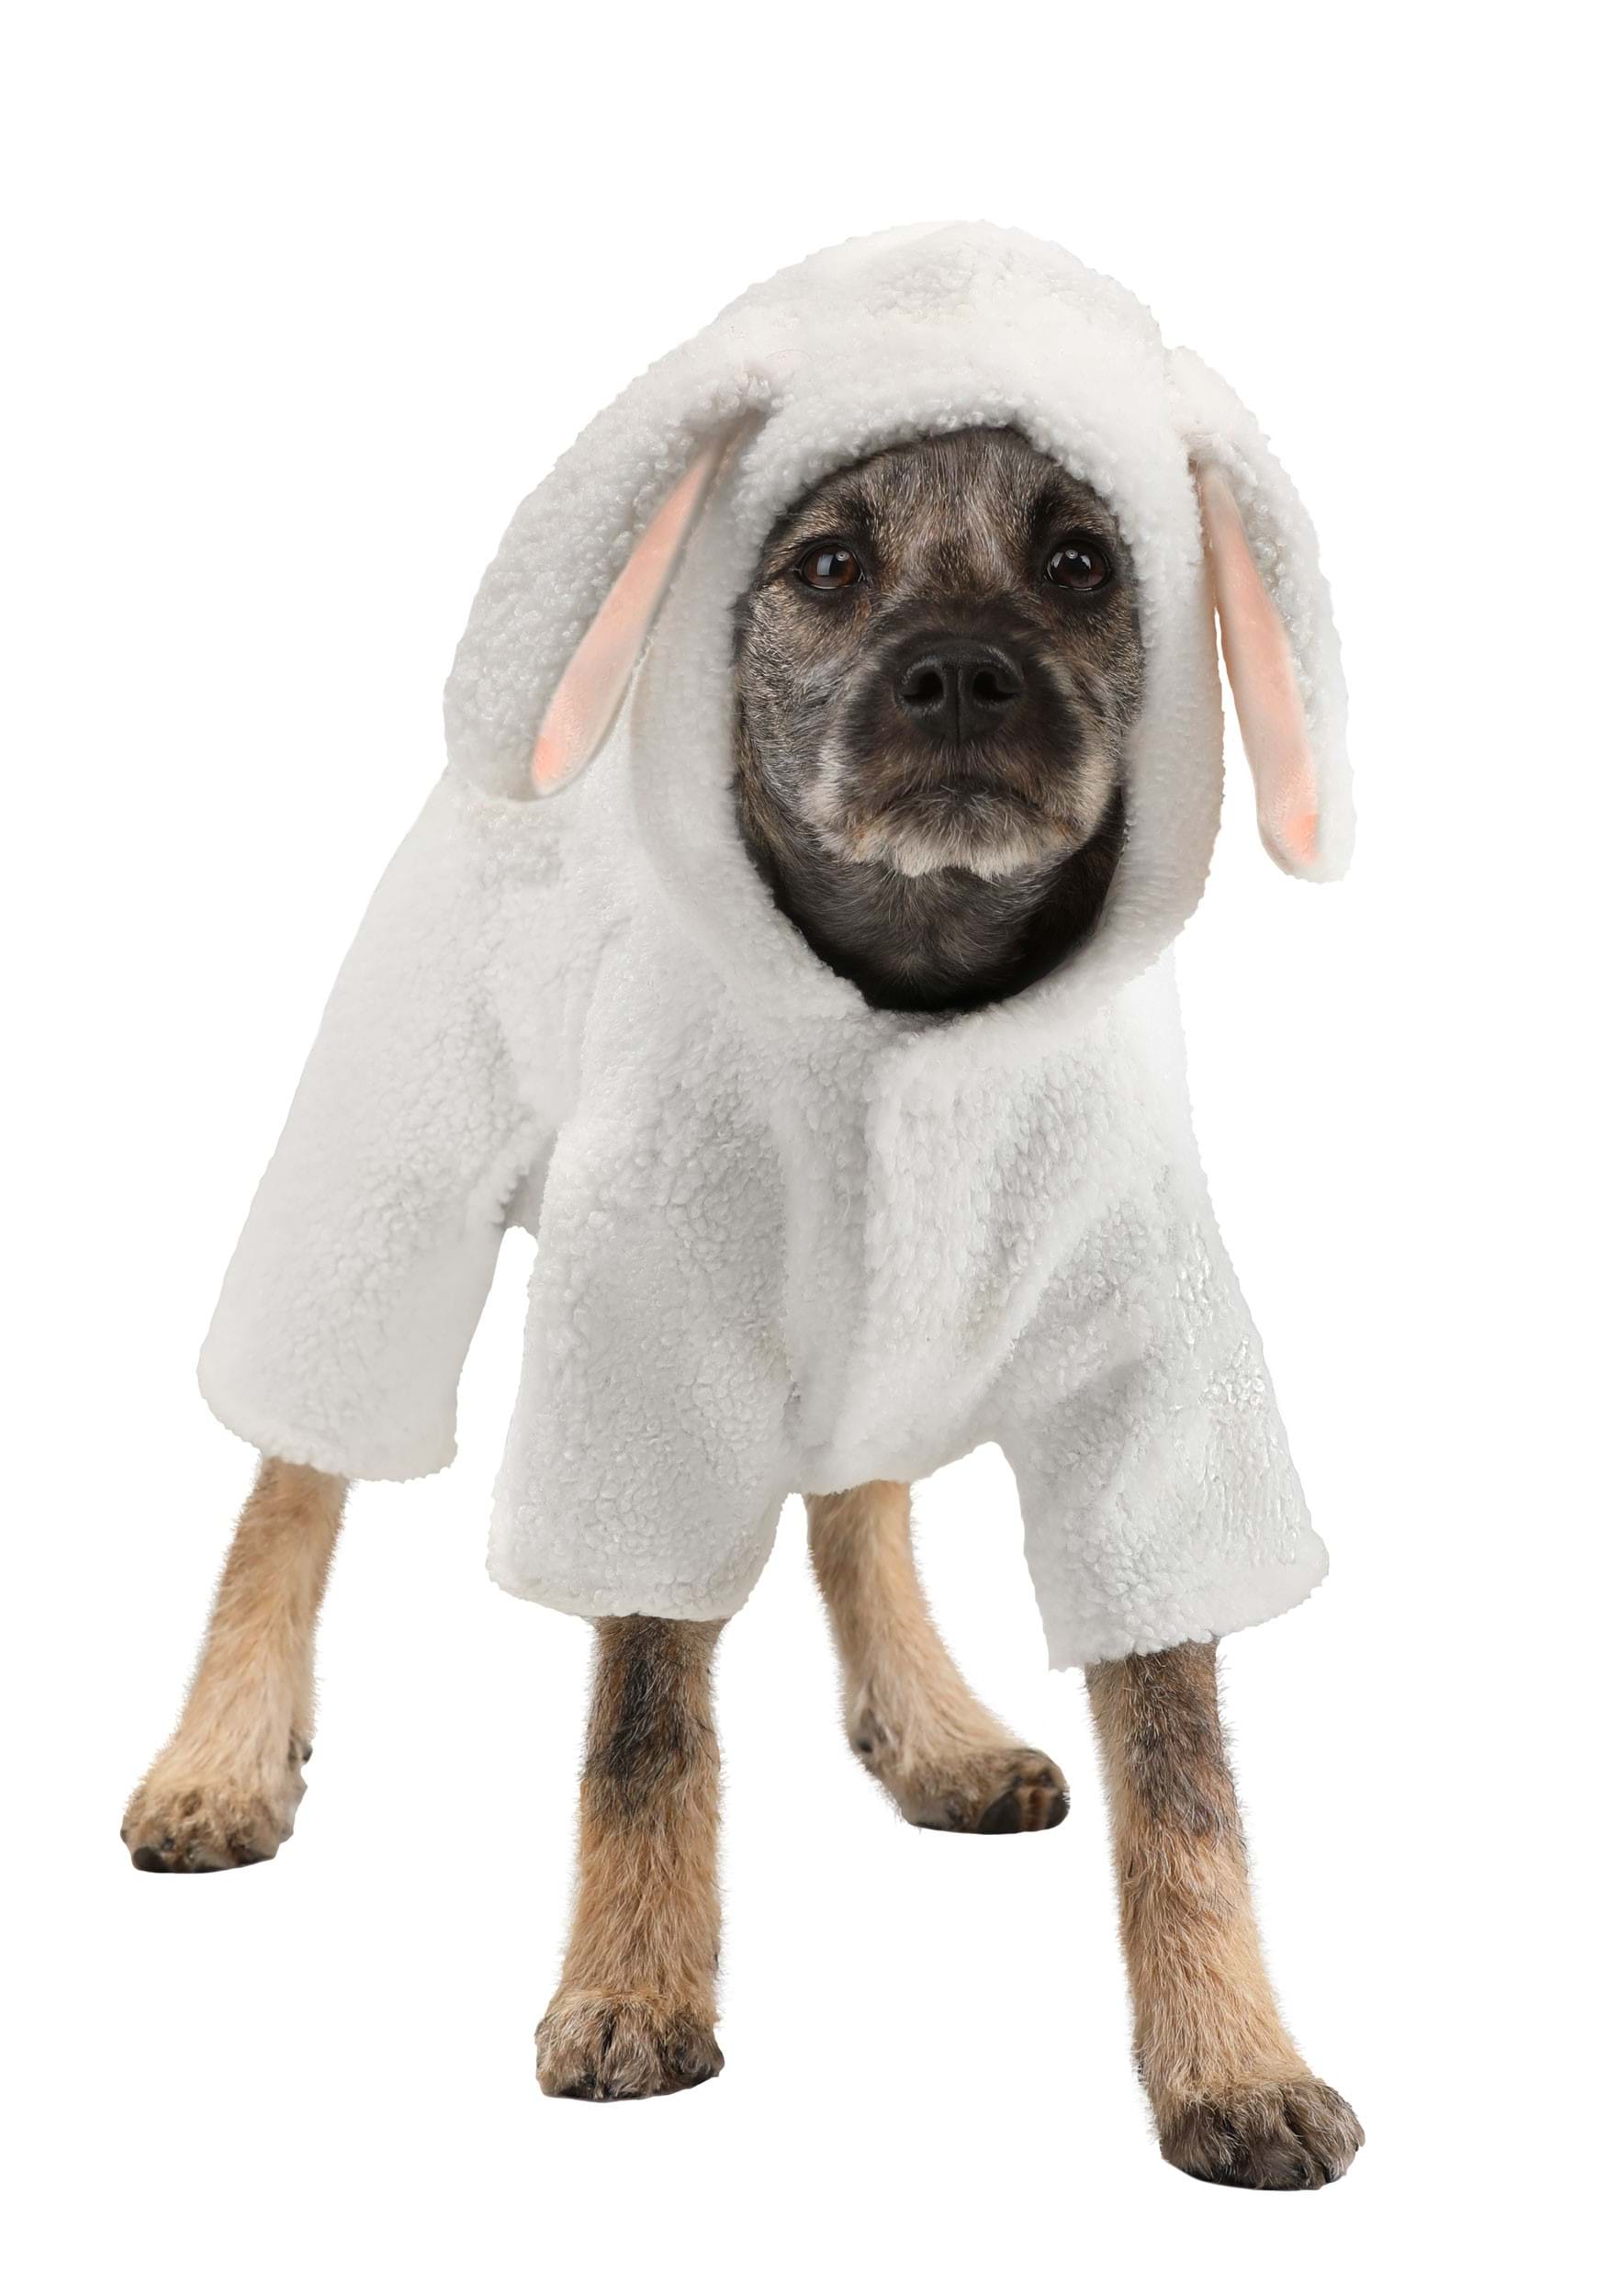 Sheep Pet Costume for Dogs and Cats